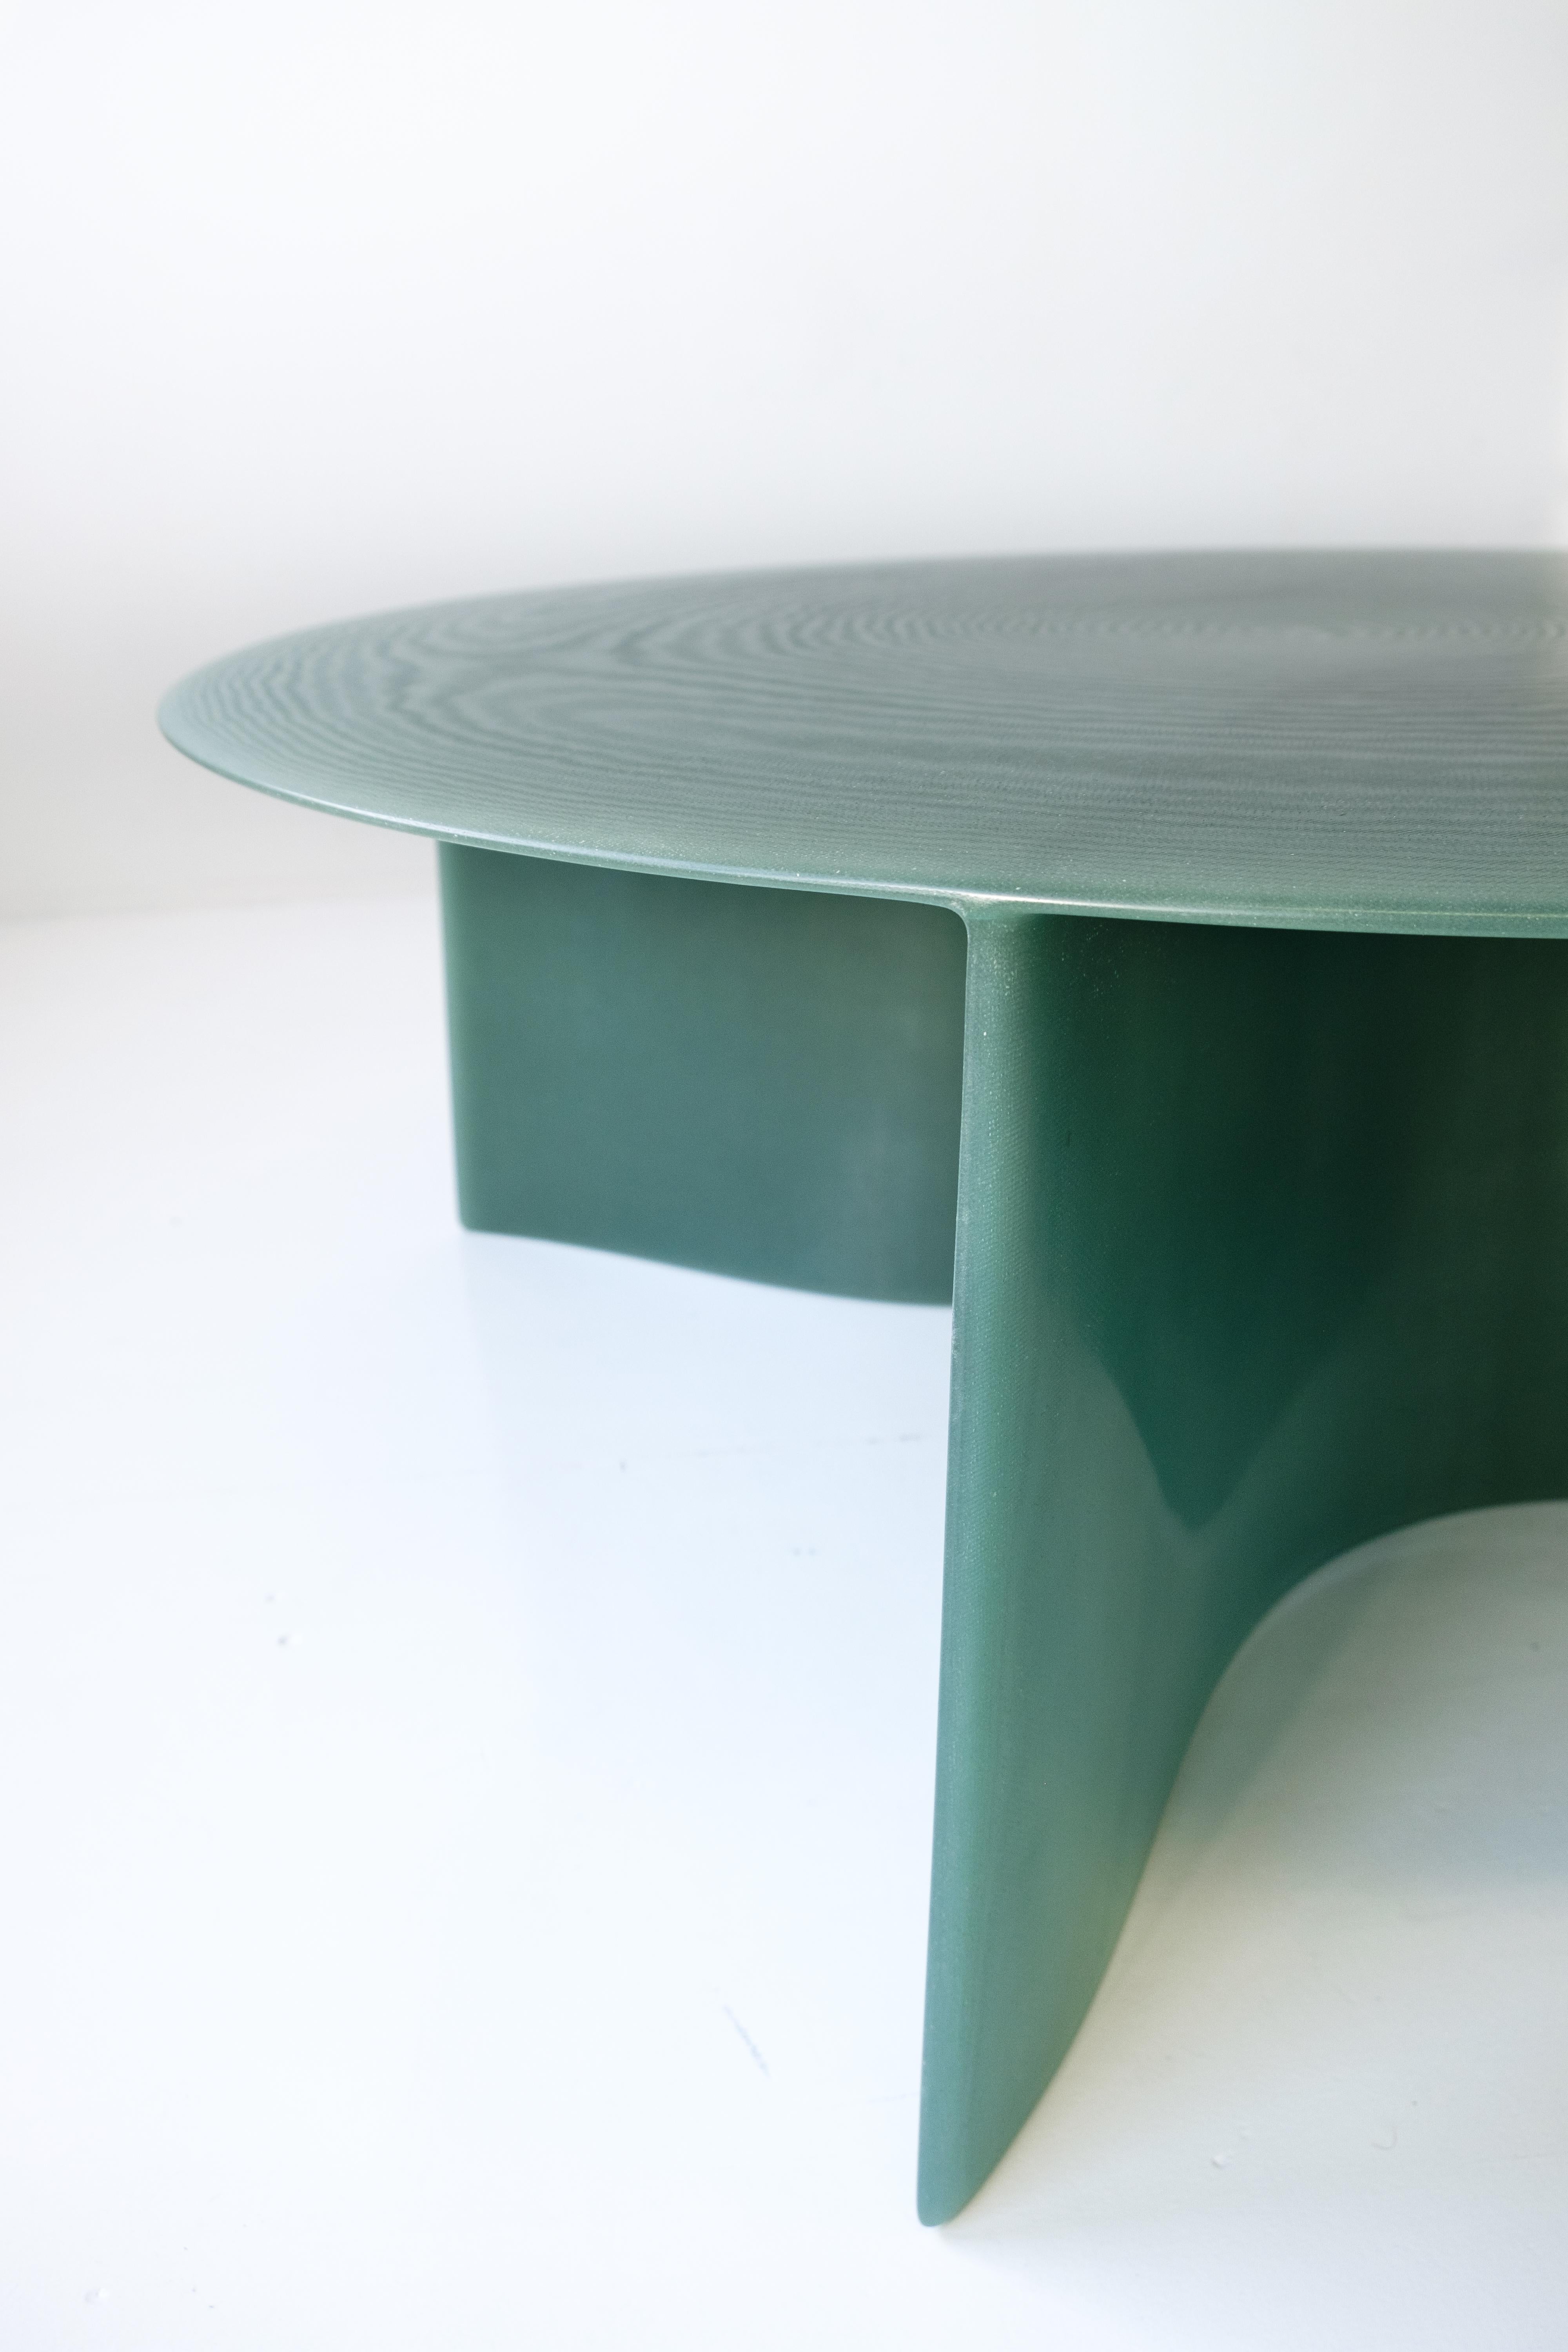 Contemporary Green Fiberglass, New Wave Coffee Table Round 120cm, by Lukas Cober 5